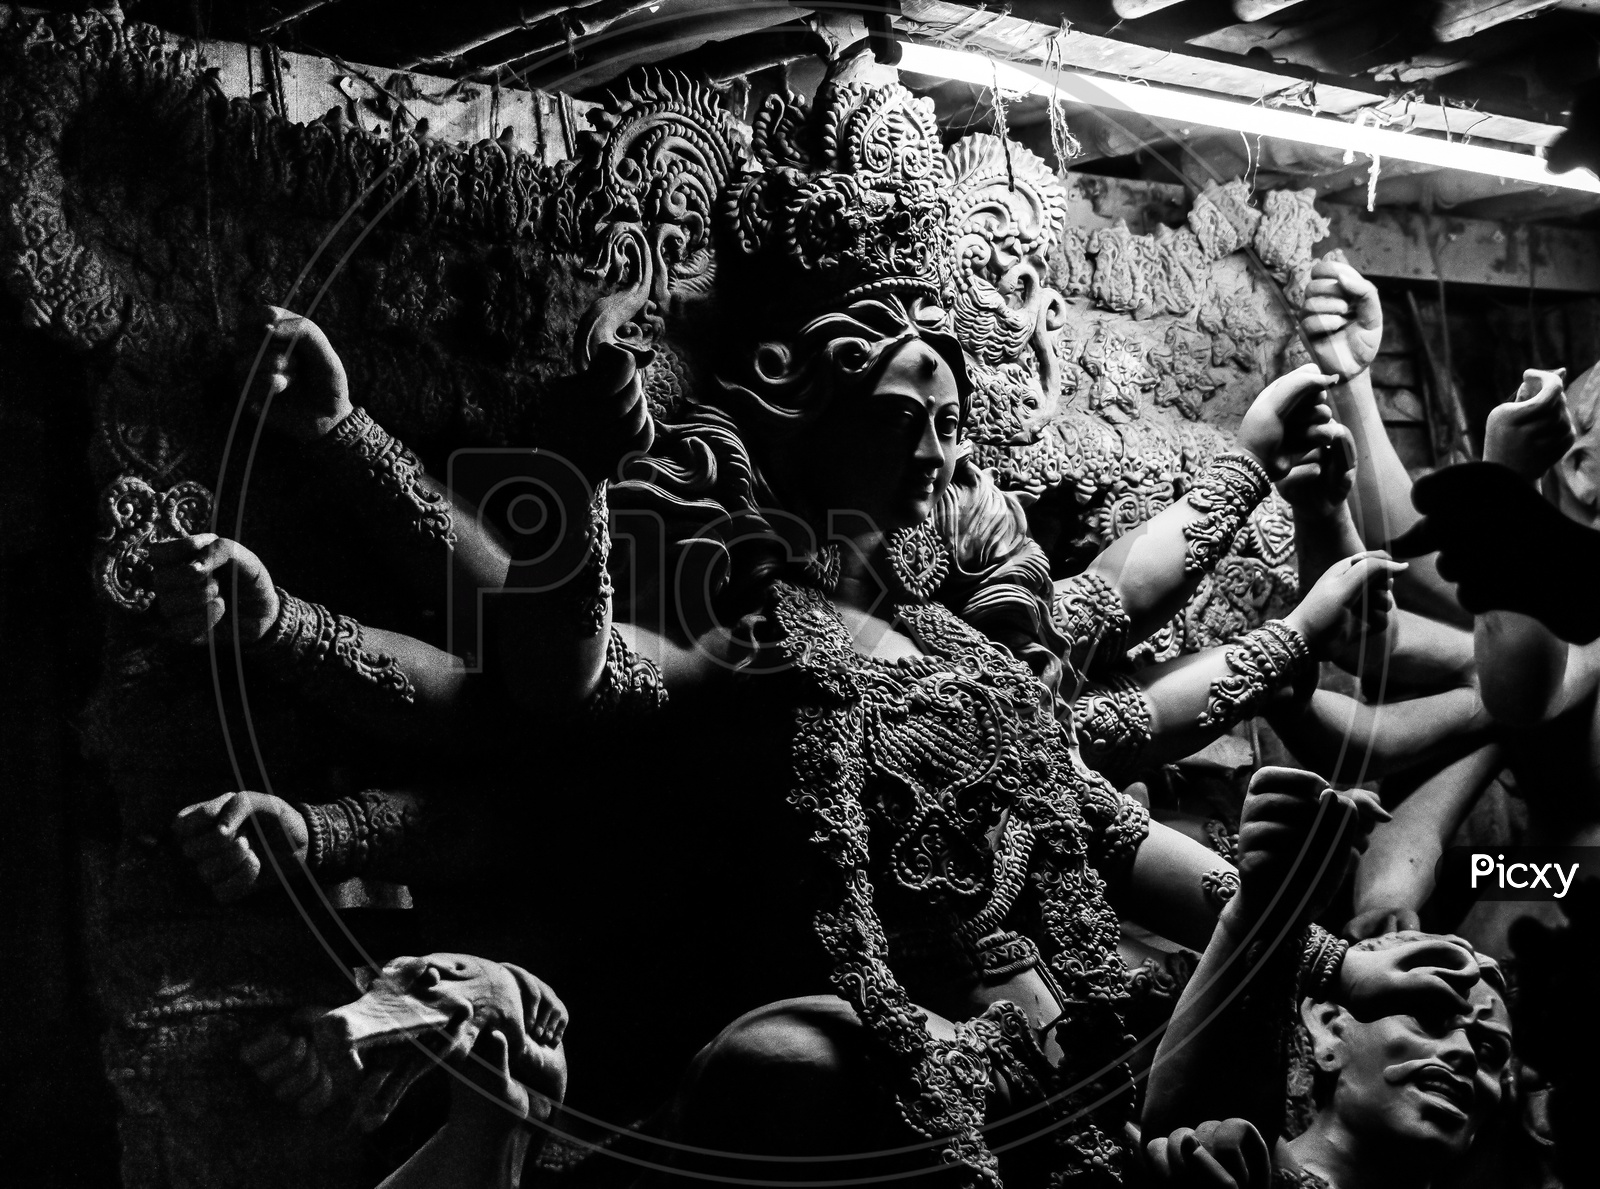 Kumartuli,West Bengal, India, July 2018. A Clay Idol Of Goddess Durga Under Construction At A Shop During Night. Durga Puja Is The Most Awaited Hindu Festival In Eastern India And Worldwide.